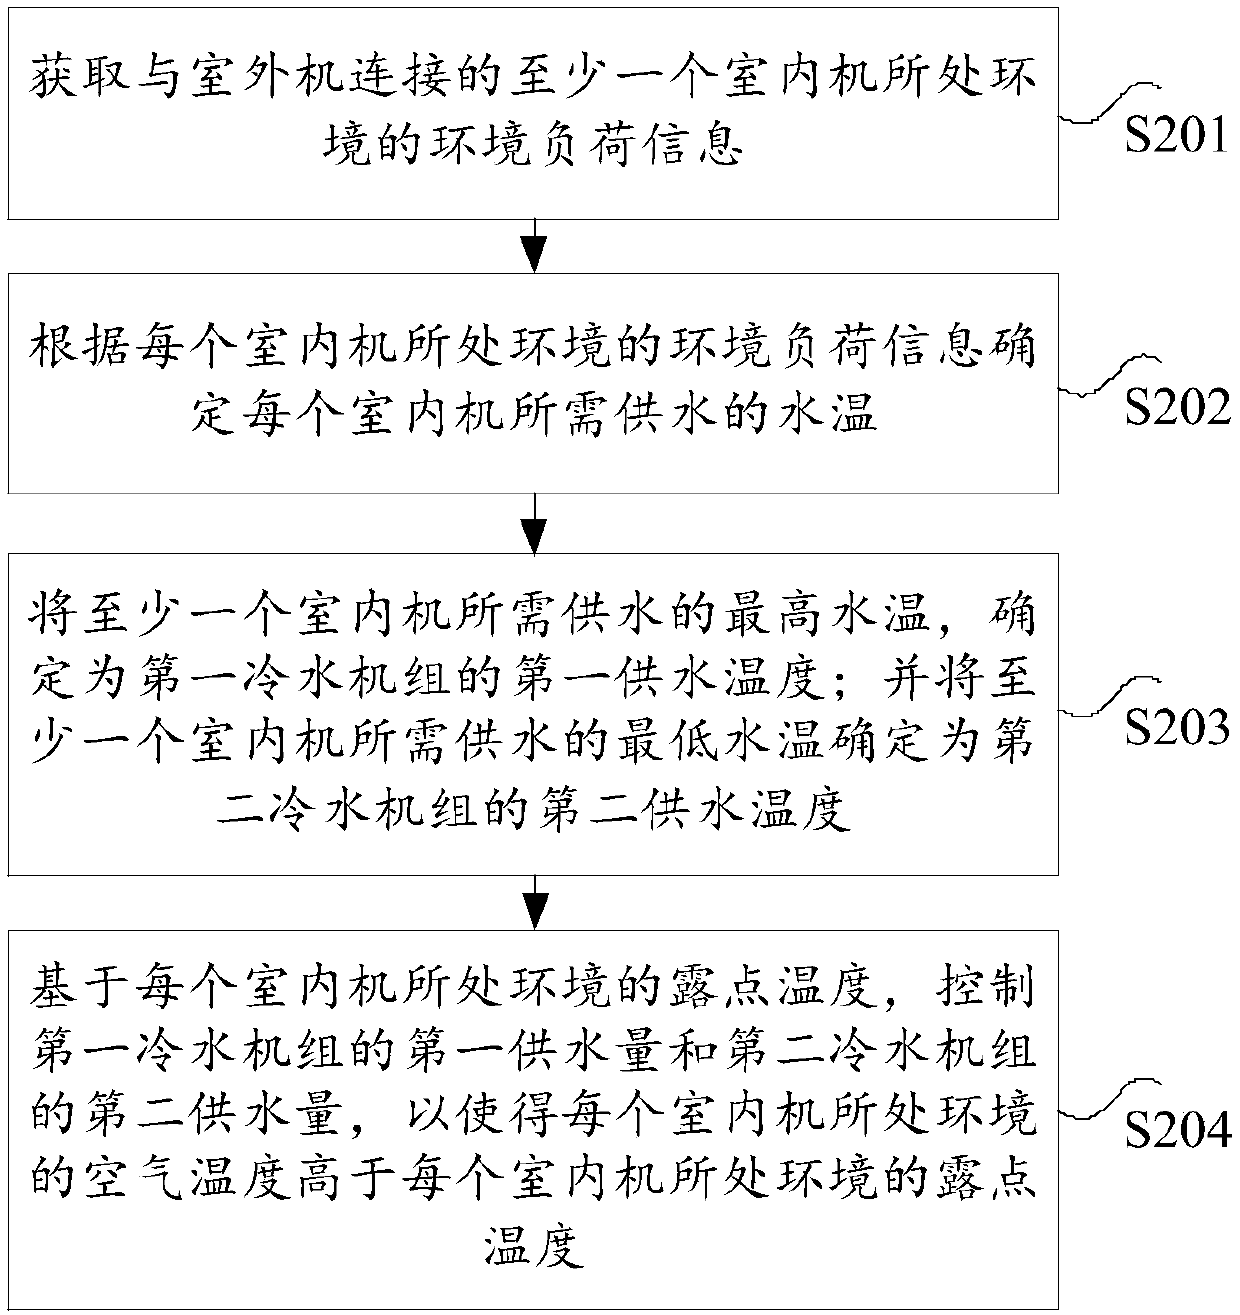 Control method and system of radiant air conditioner